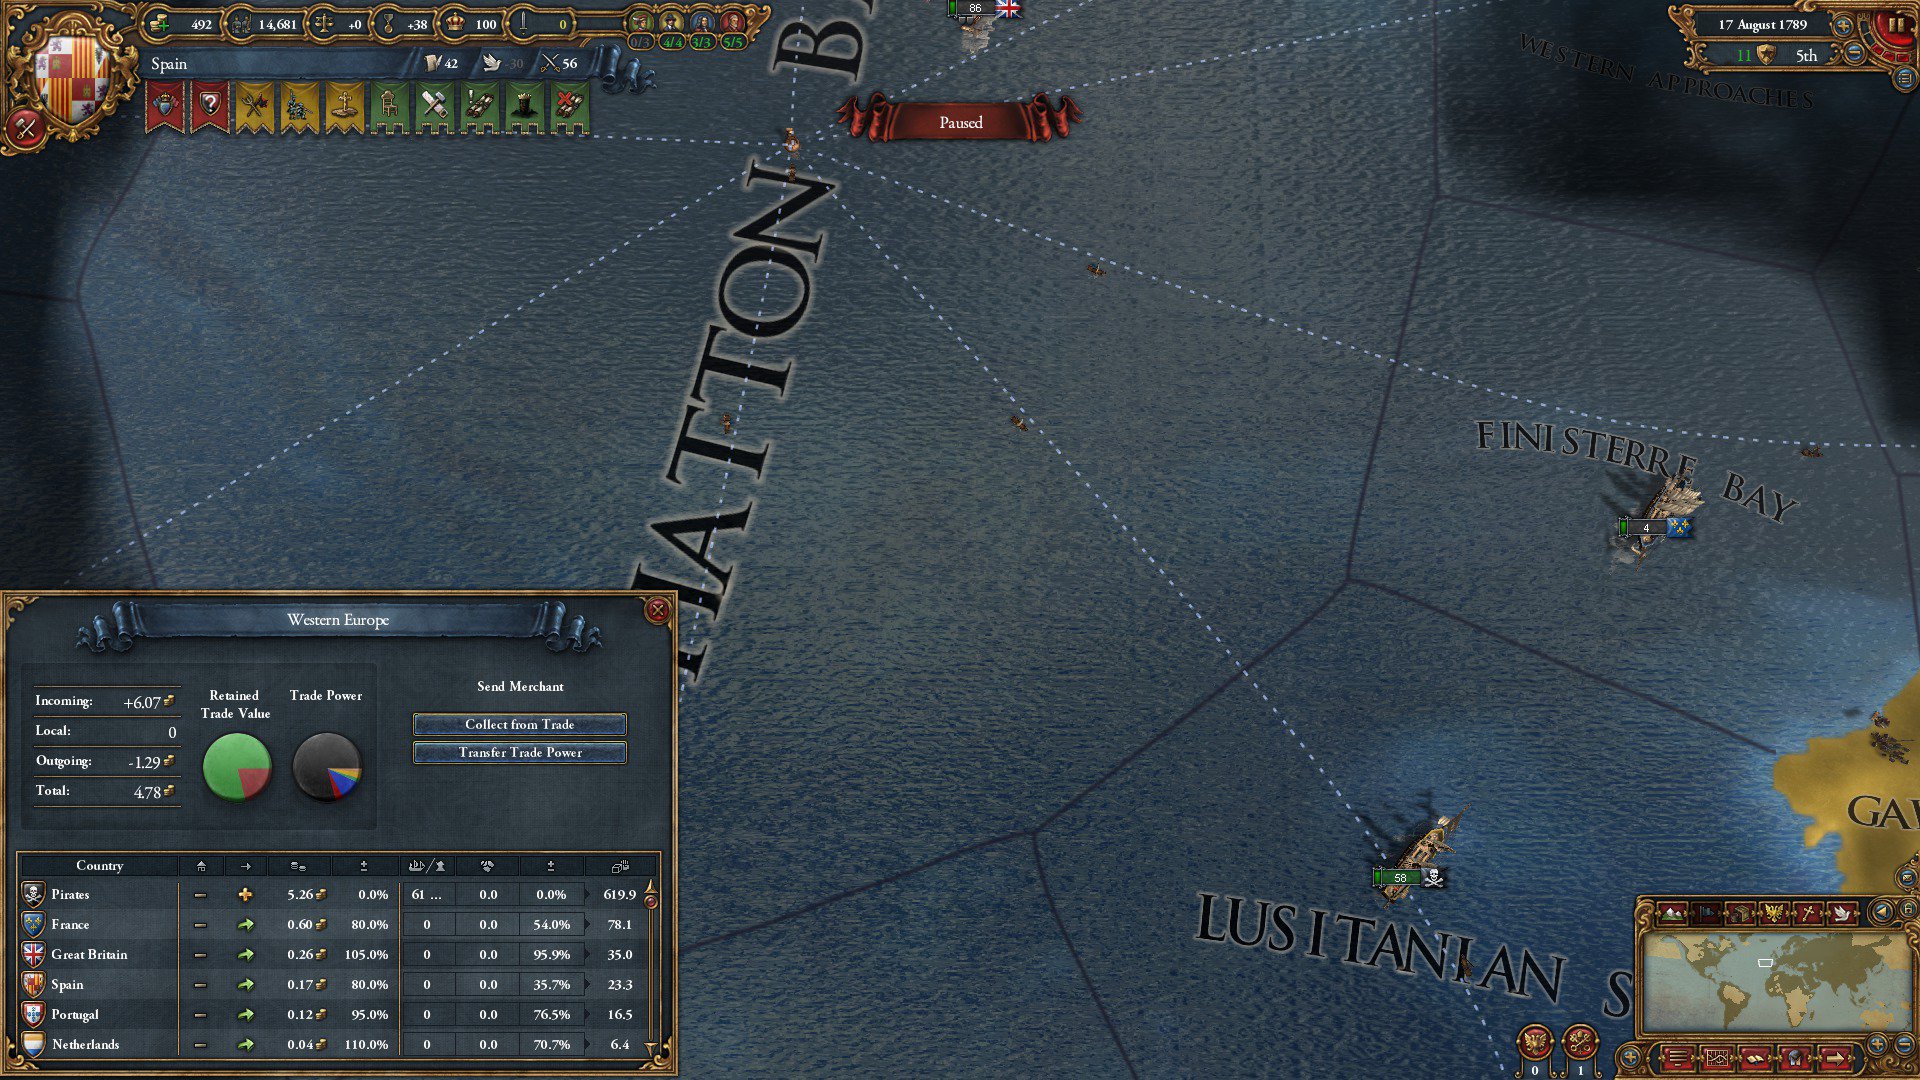 ESD Europa Universalis IV Wealth of Nations 